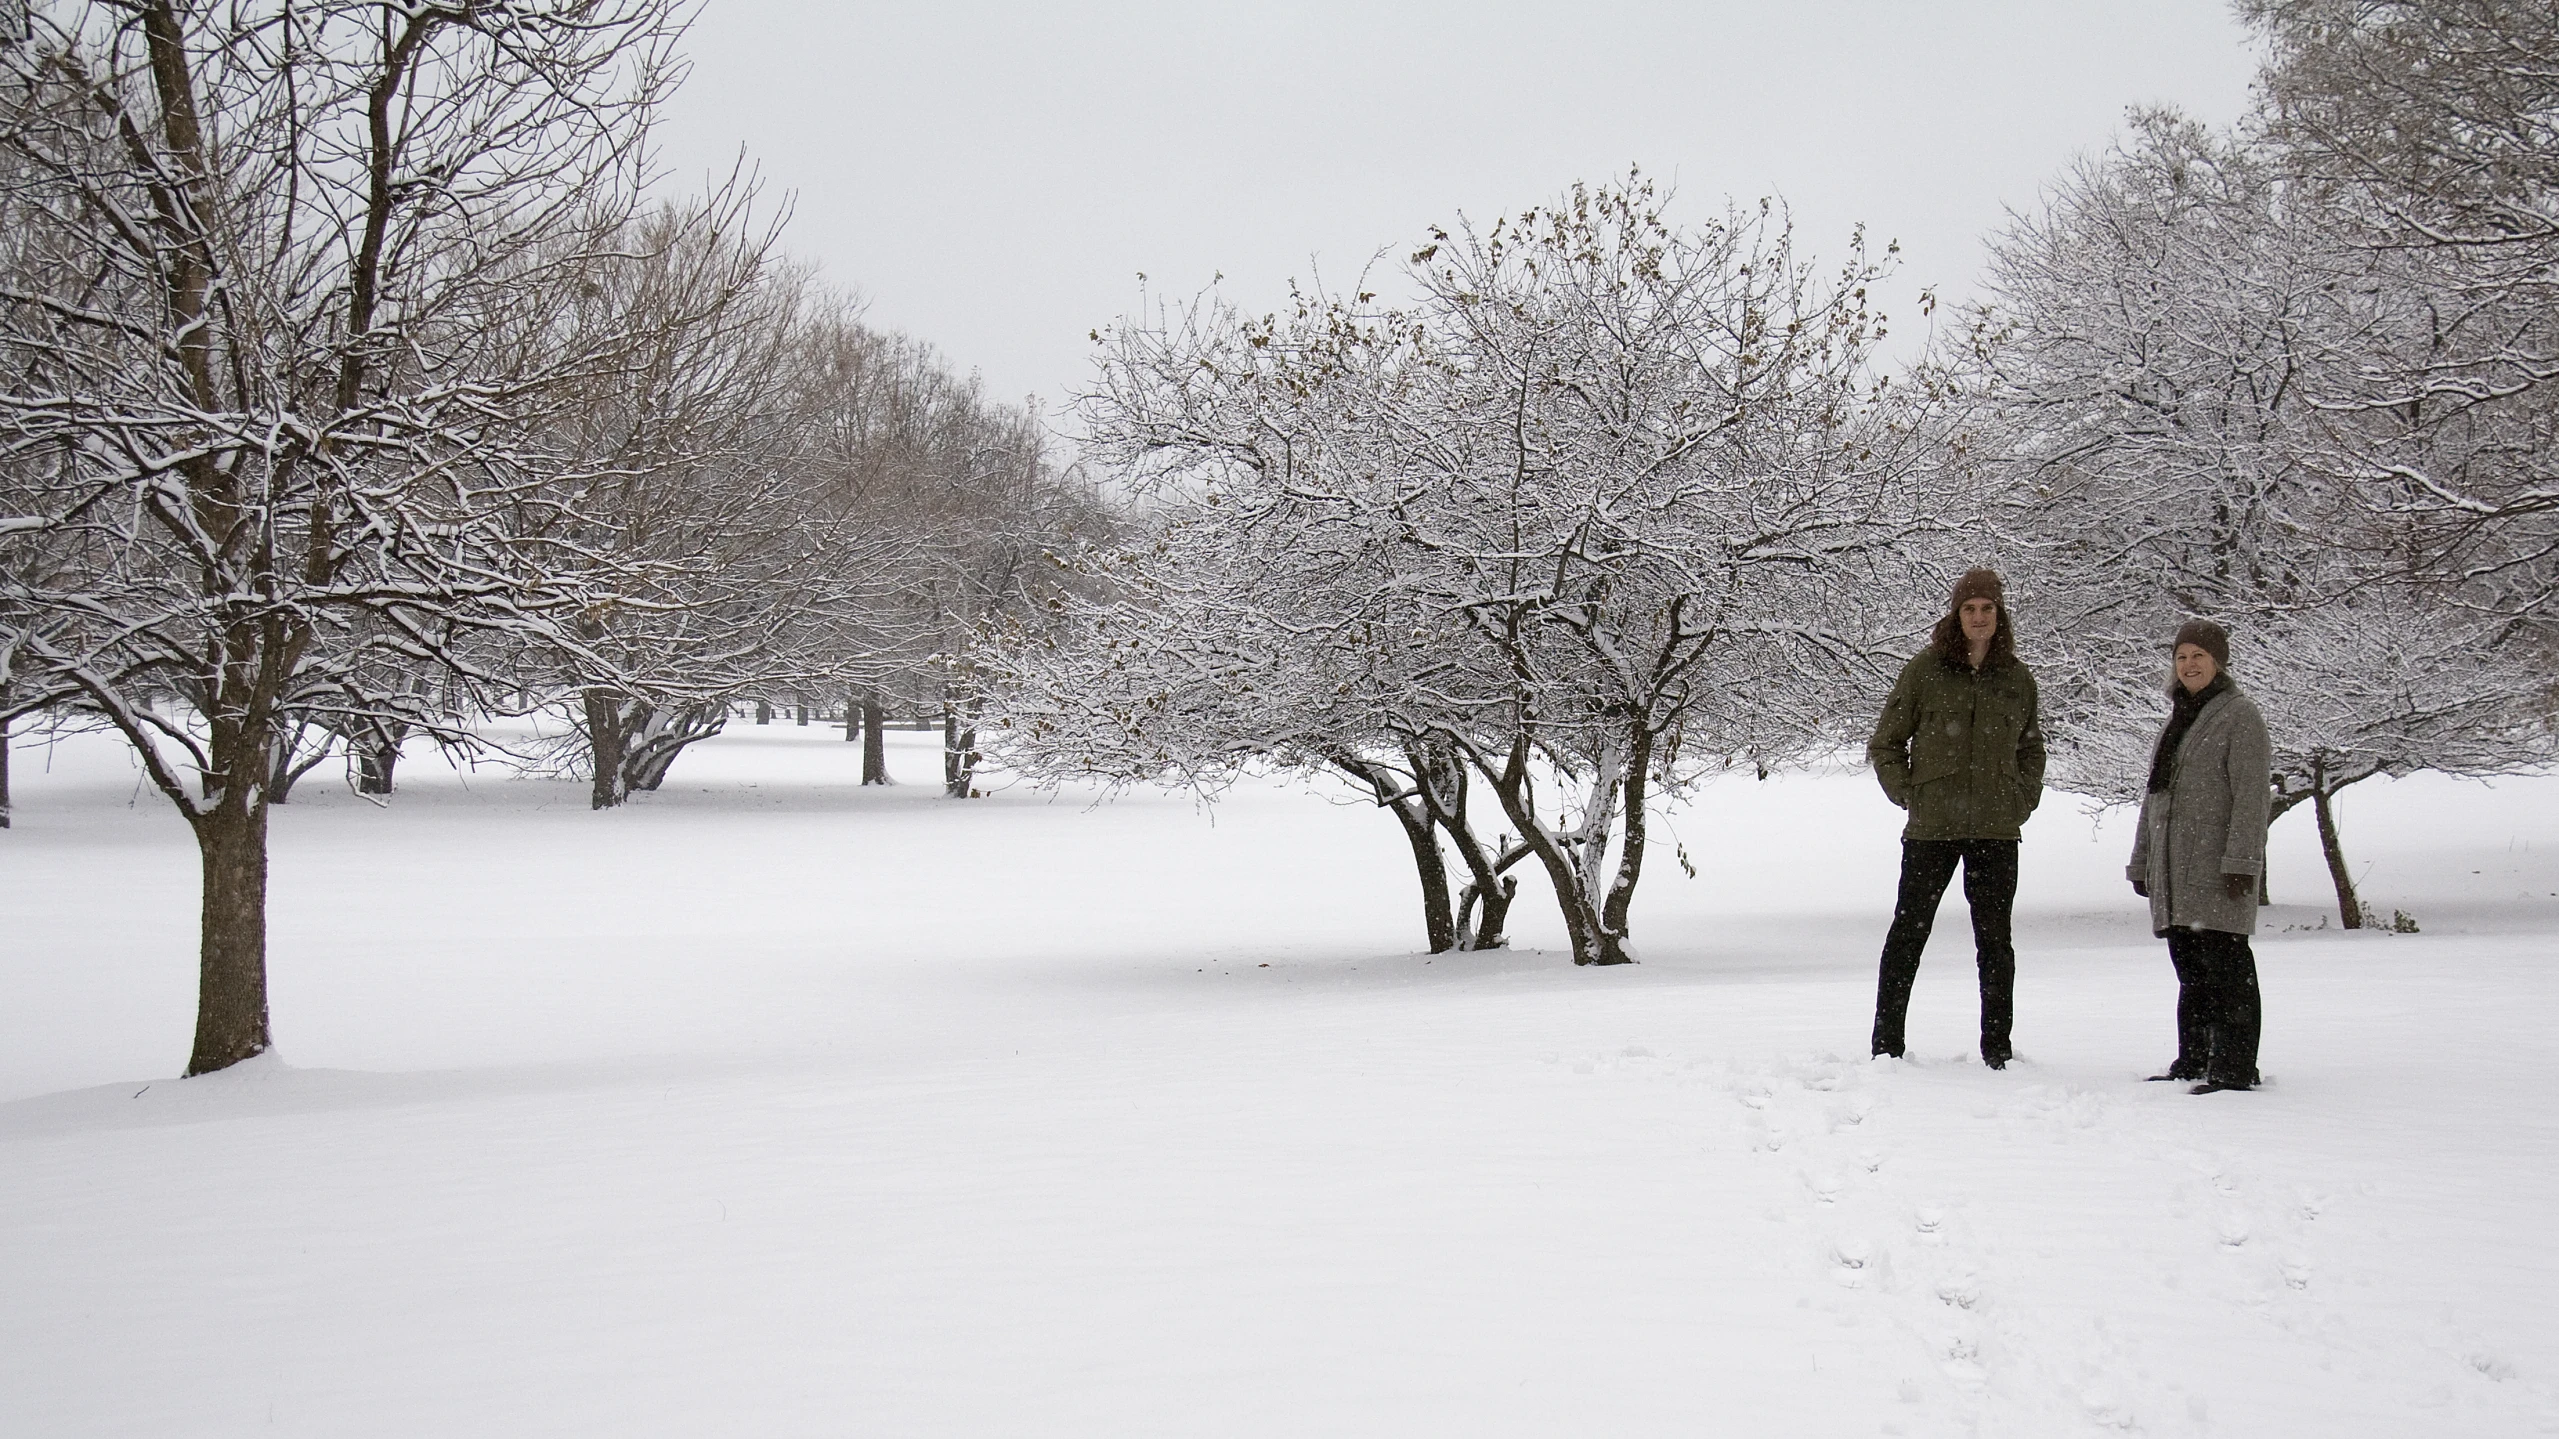 two people stand in the snow next to trees